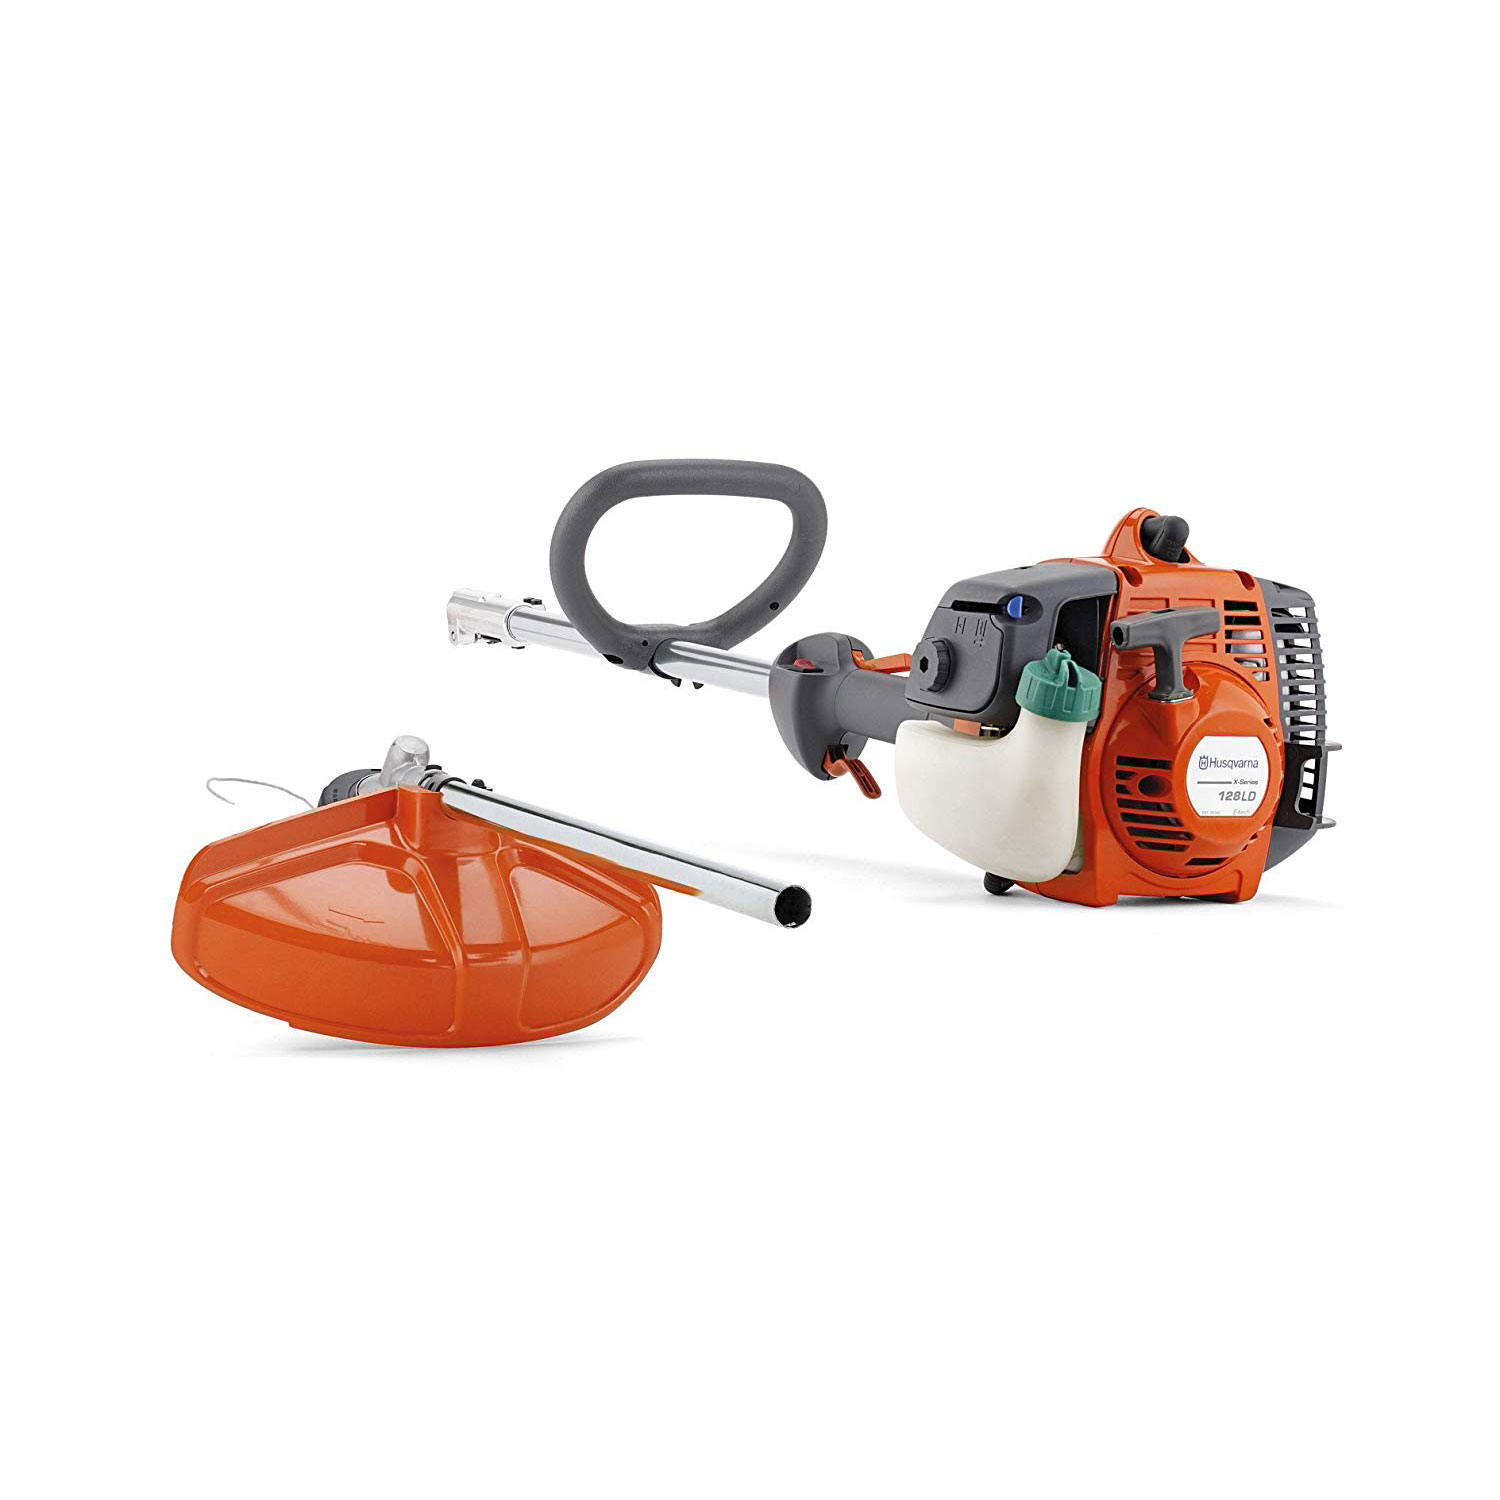 Husqvarna 128ld Gas Powered Lawn Trimmer And Battery Operated Toy Weed